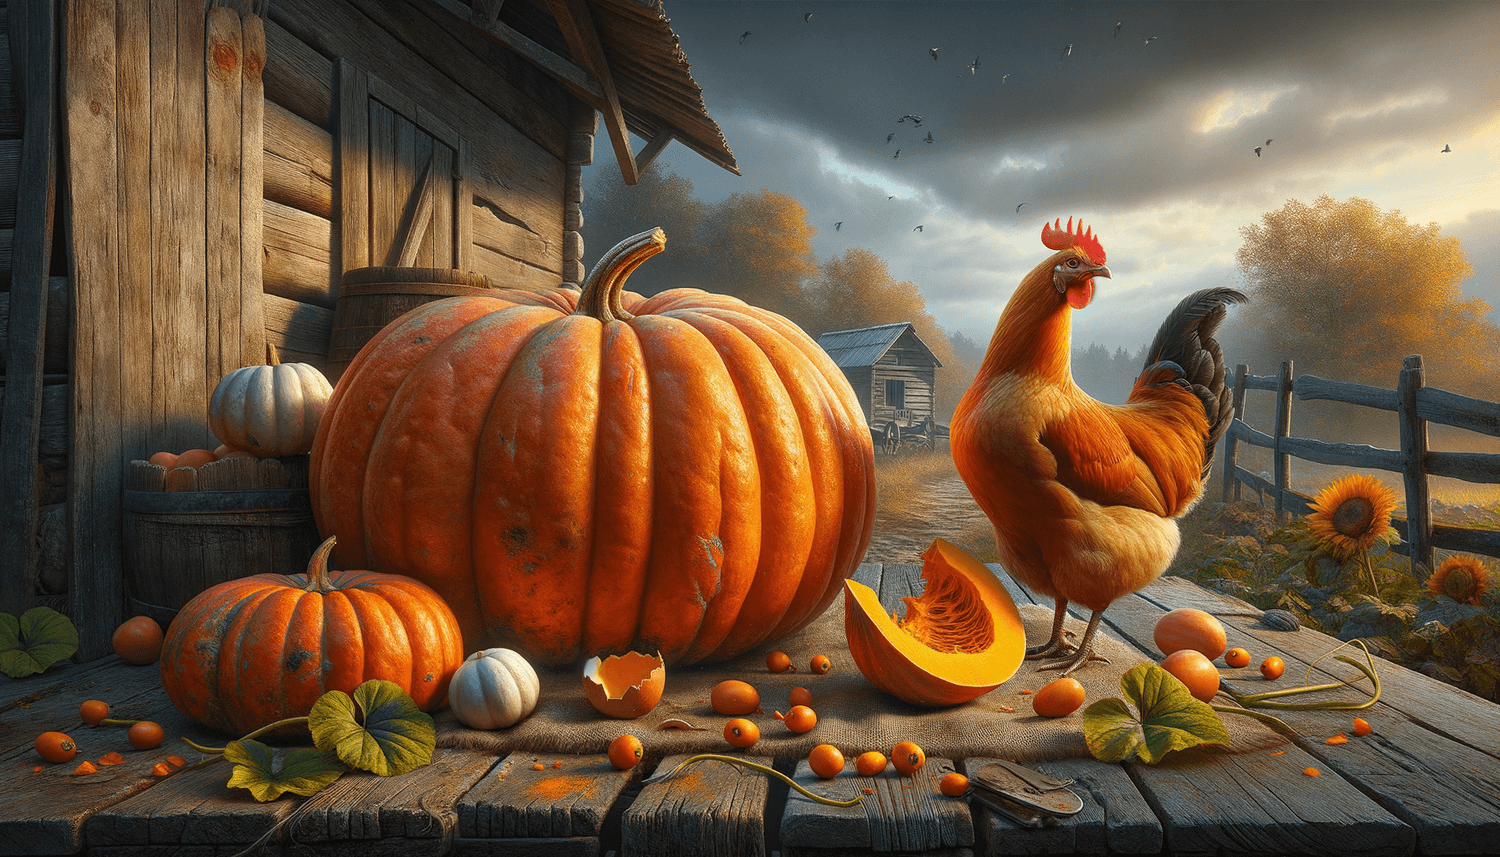 Can Chickens Eat The Whole Pumpkin?